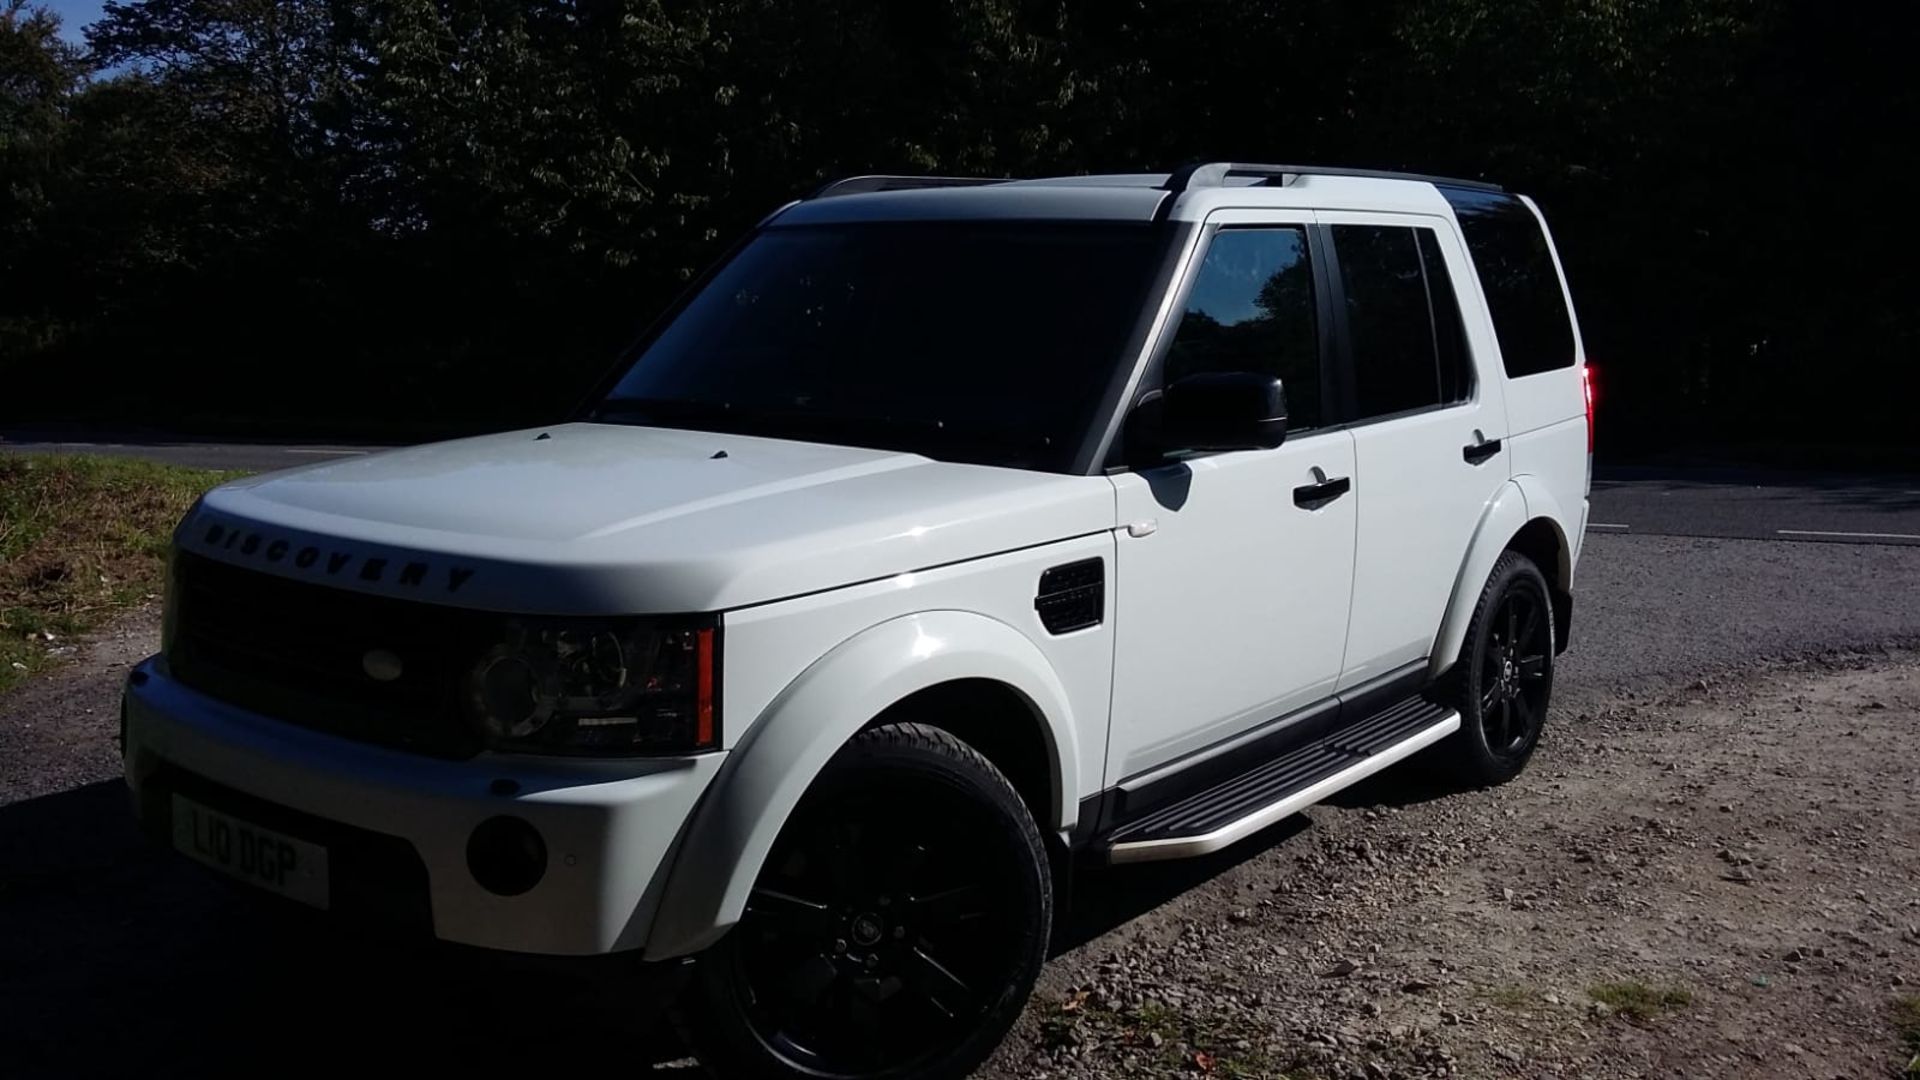 2011/60 REG LAND ROVER DISCOVERY TDV6 AUTOMATIC WHITE DIESEL LIGHT 4X4 *NO VAT* - Image 2 of 11